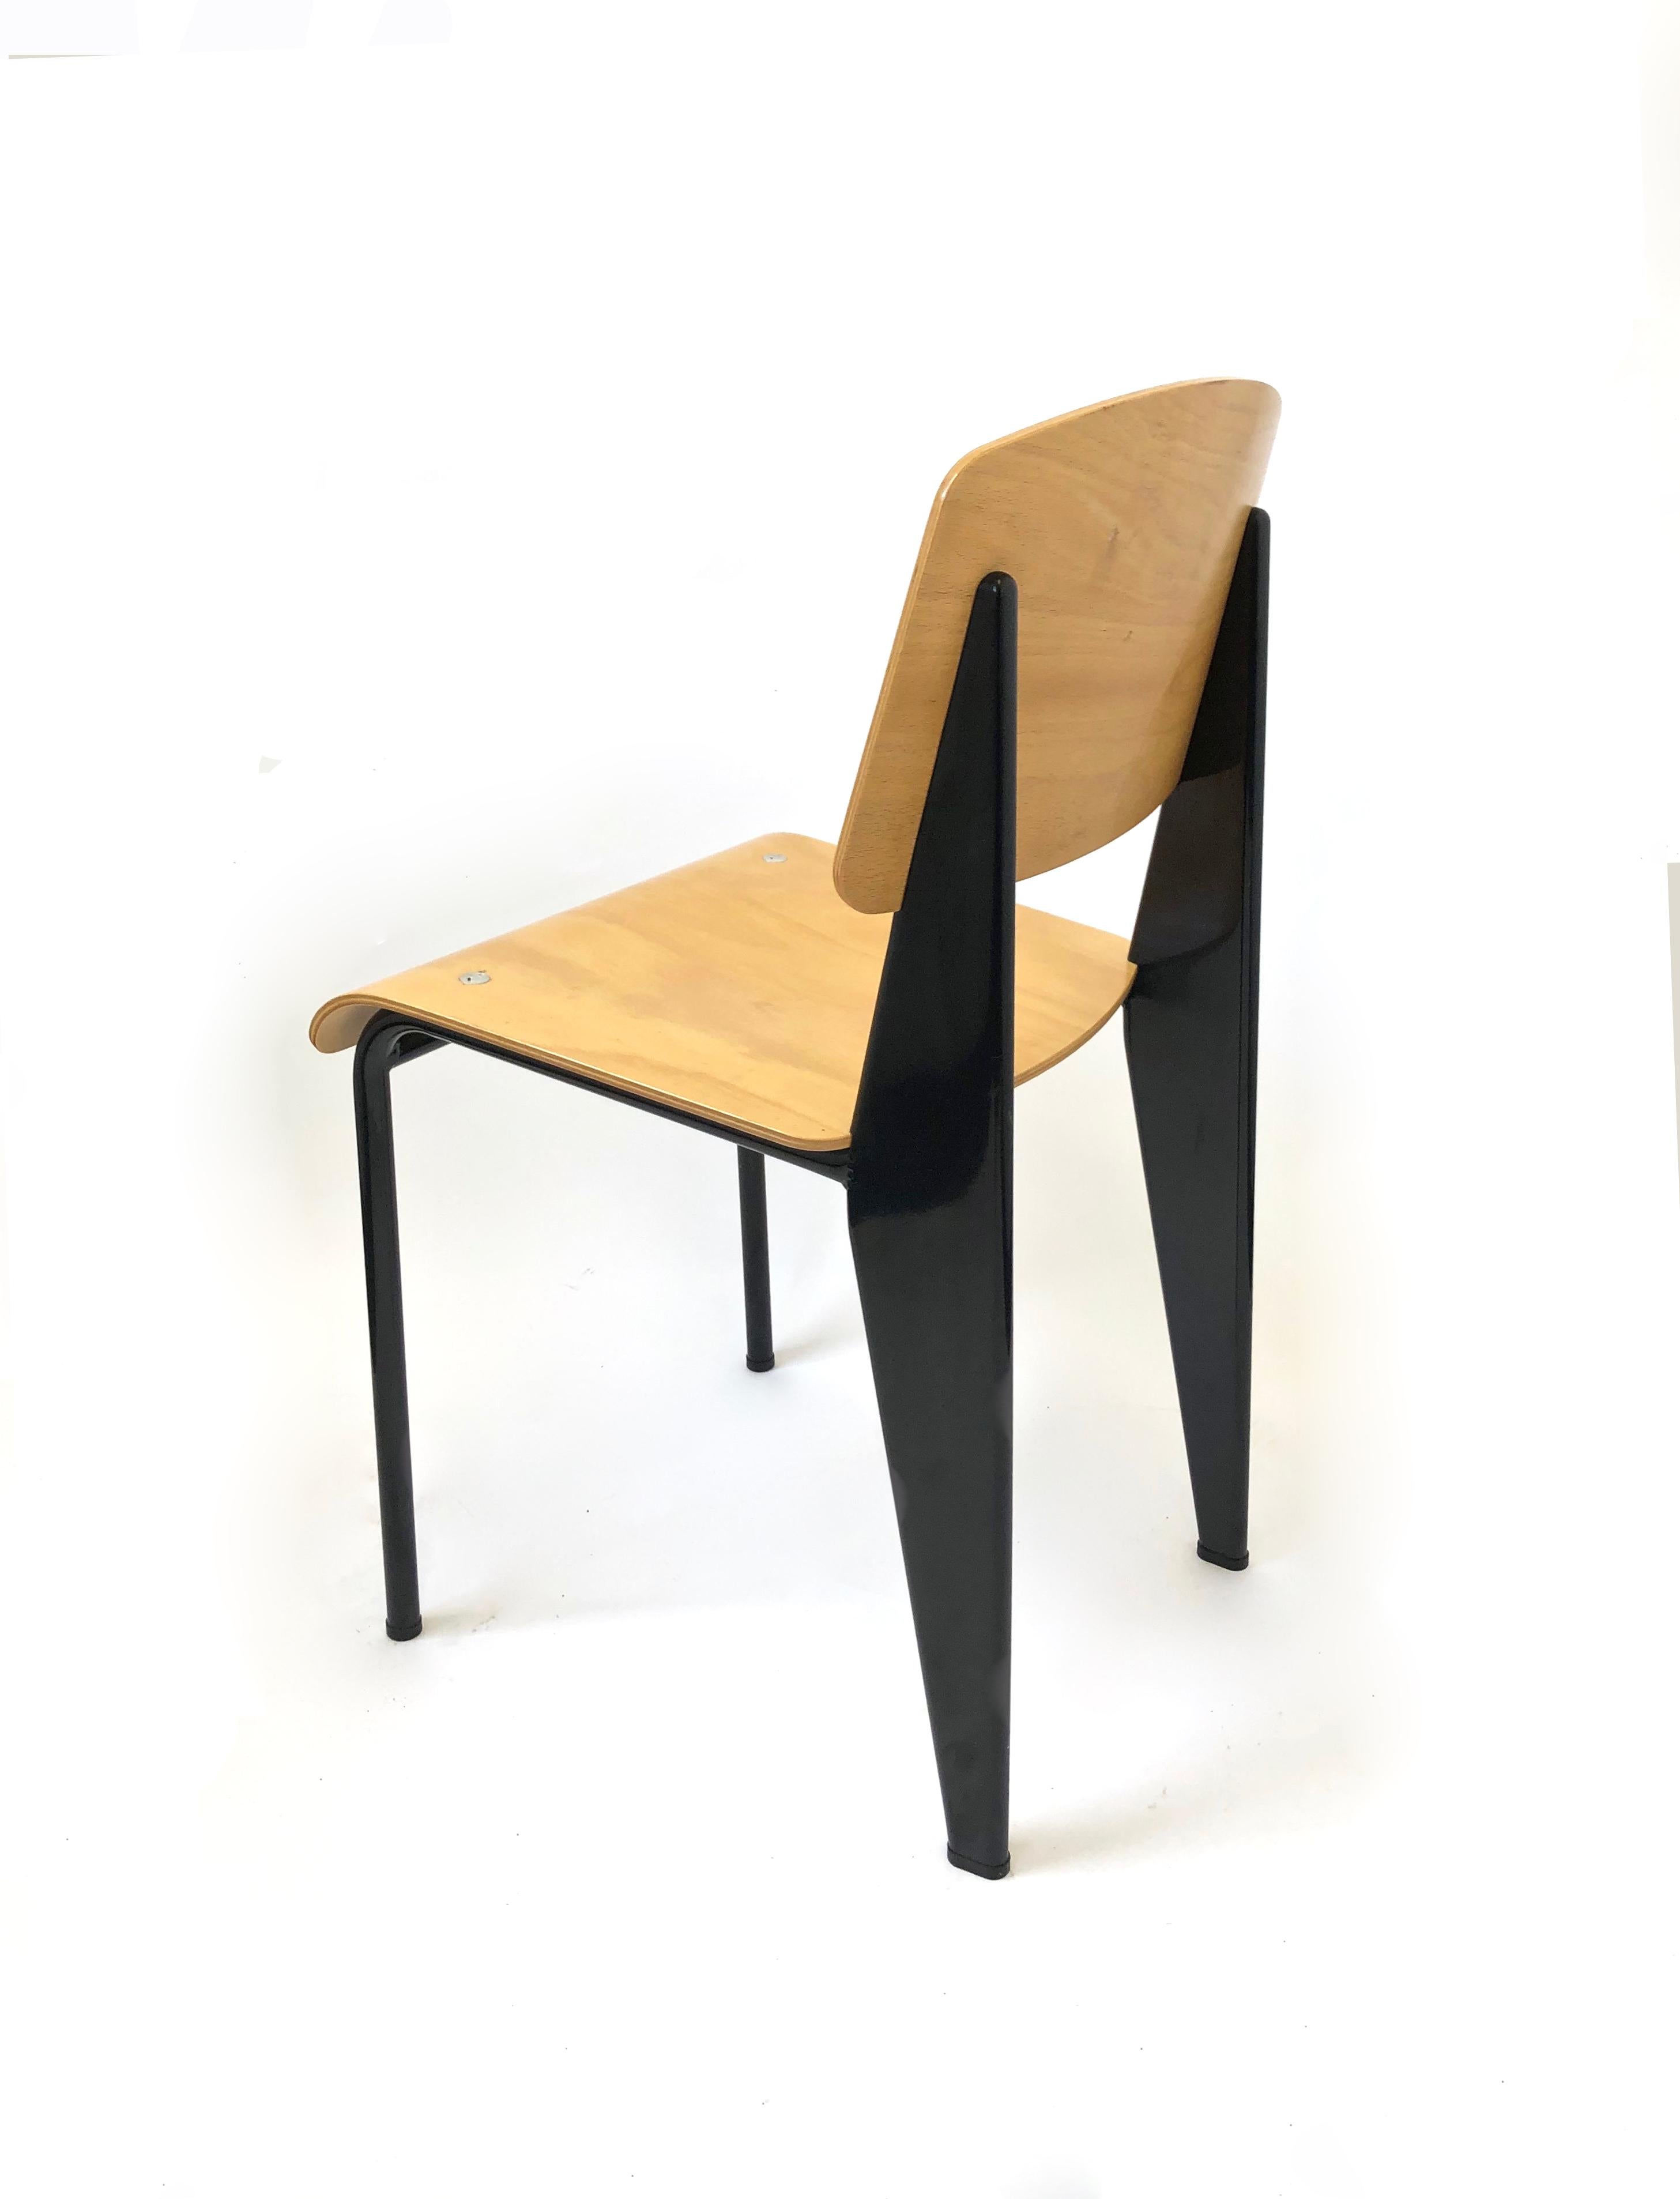 Standard Chair by Jean Prouvé, Vitra Edition 2002 1